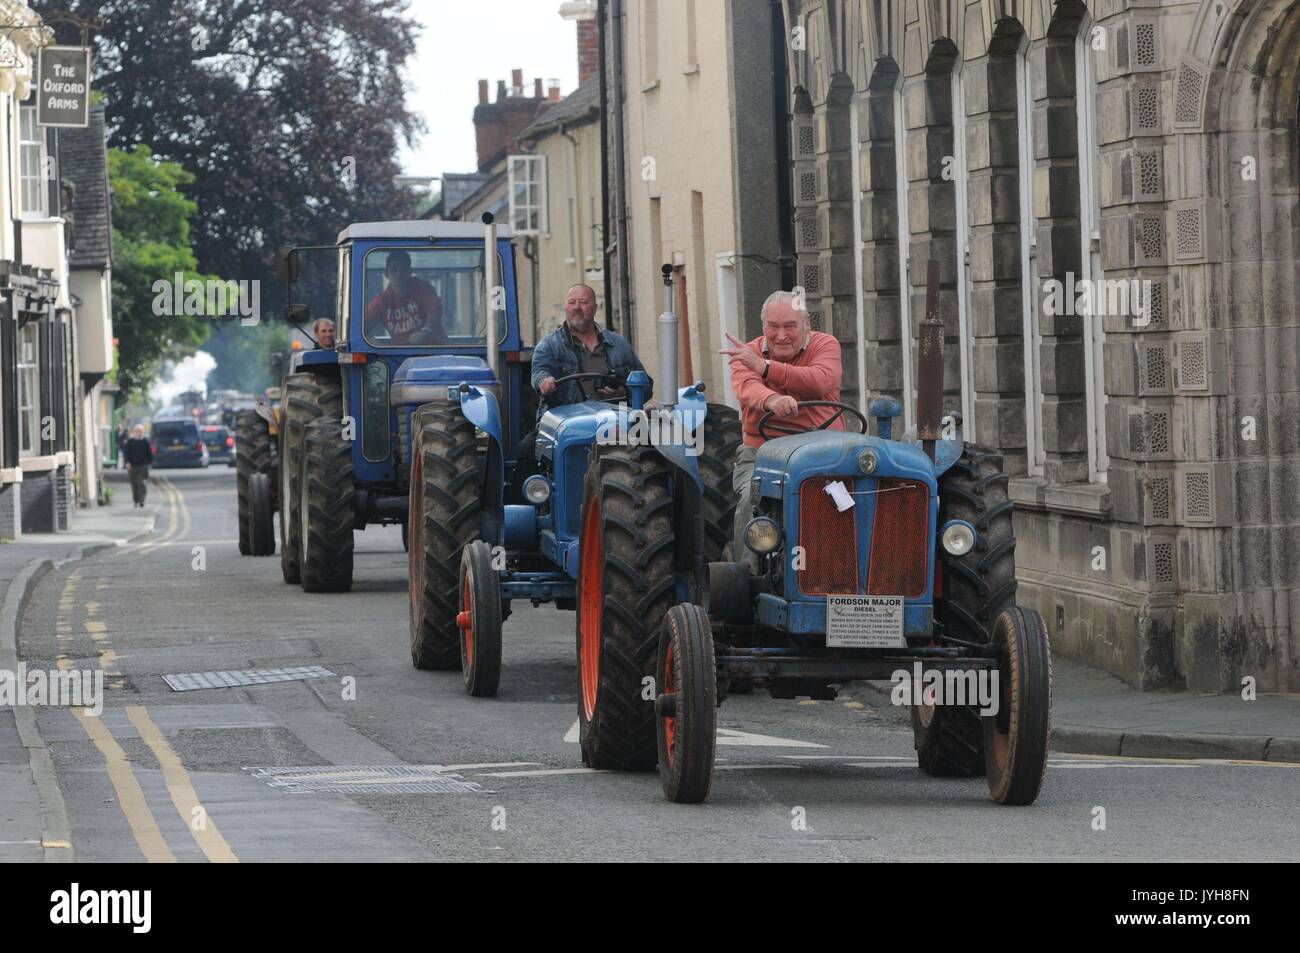 Kington, , UK. 20th Aug, 2017. The Herefordshire market town of Kington came to a standstill while a parade of vintage vehicles made their way to the Kington Vintage Club's 25th Annual Show. Alan Bayliss driving his 1952 Fordson Mason tractor into the town's High Street. Alan has been coming to the show since it started 25 years ago. Credit: Andrew Compton/Alamy Live News Stock Photo